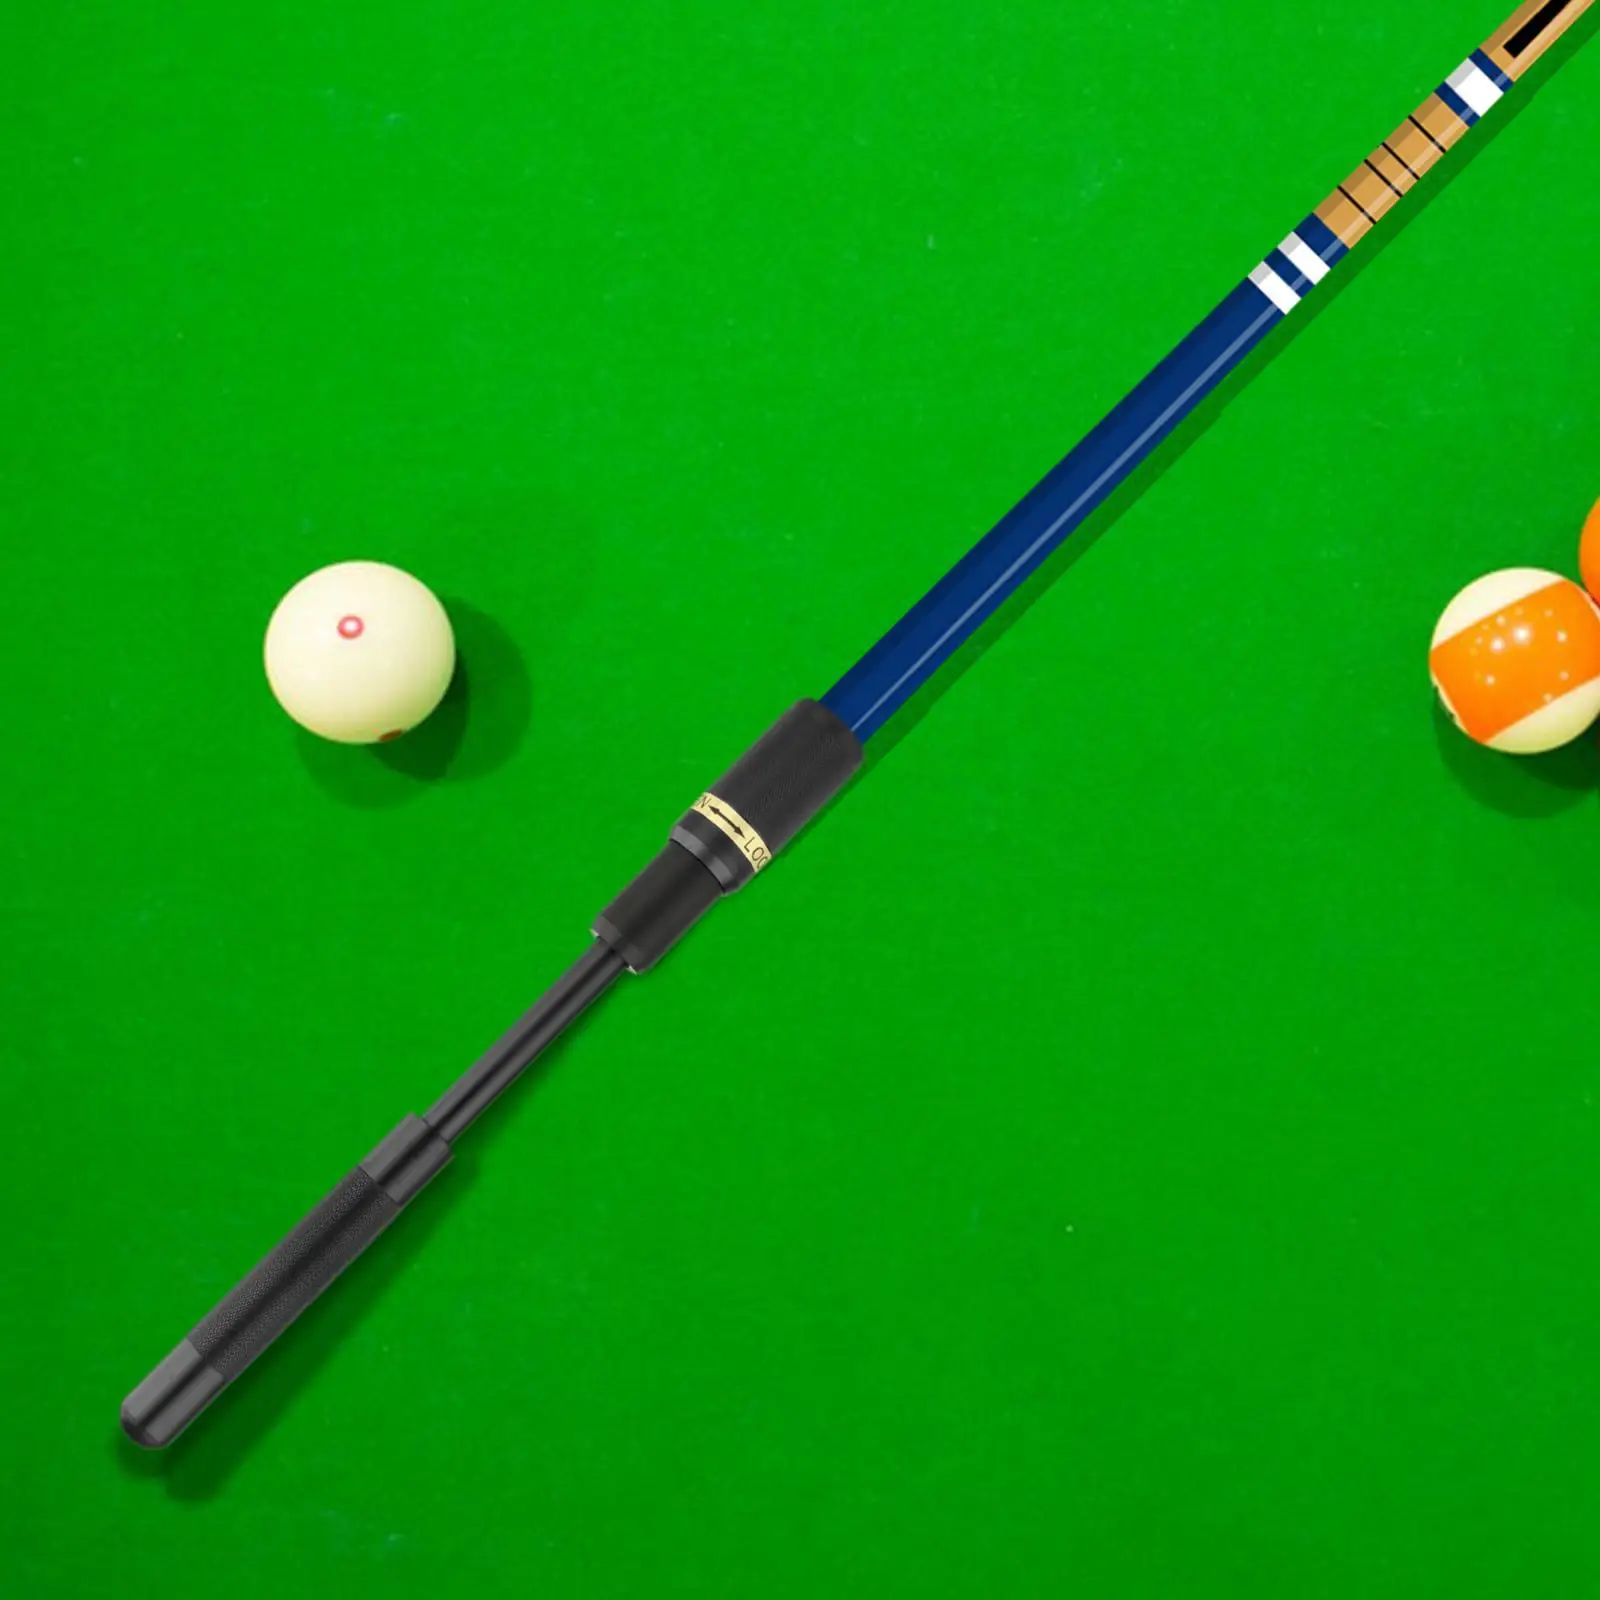 Snooker Pool Extender Billiard Snooker Extension for Enthusiast